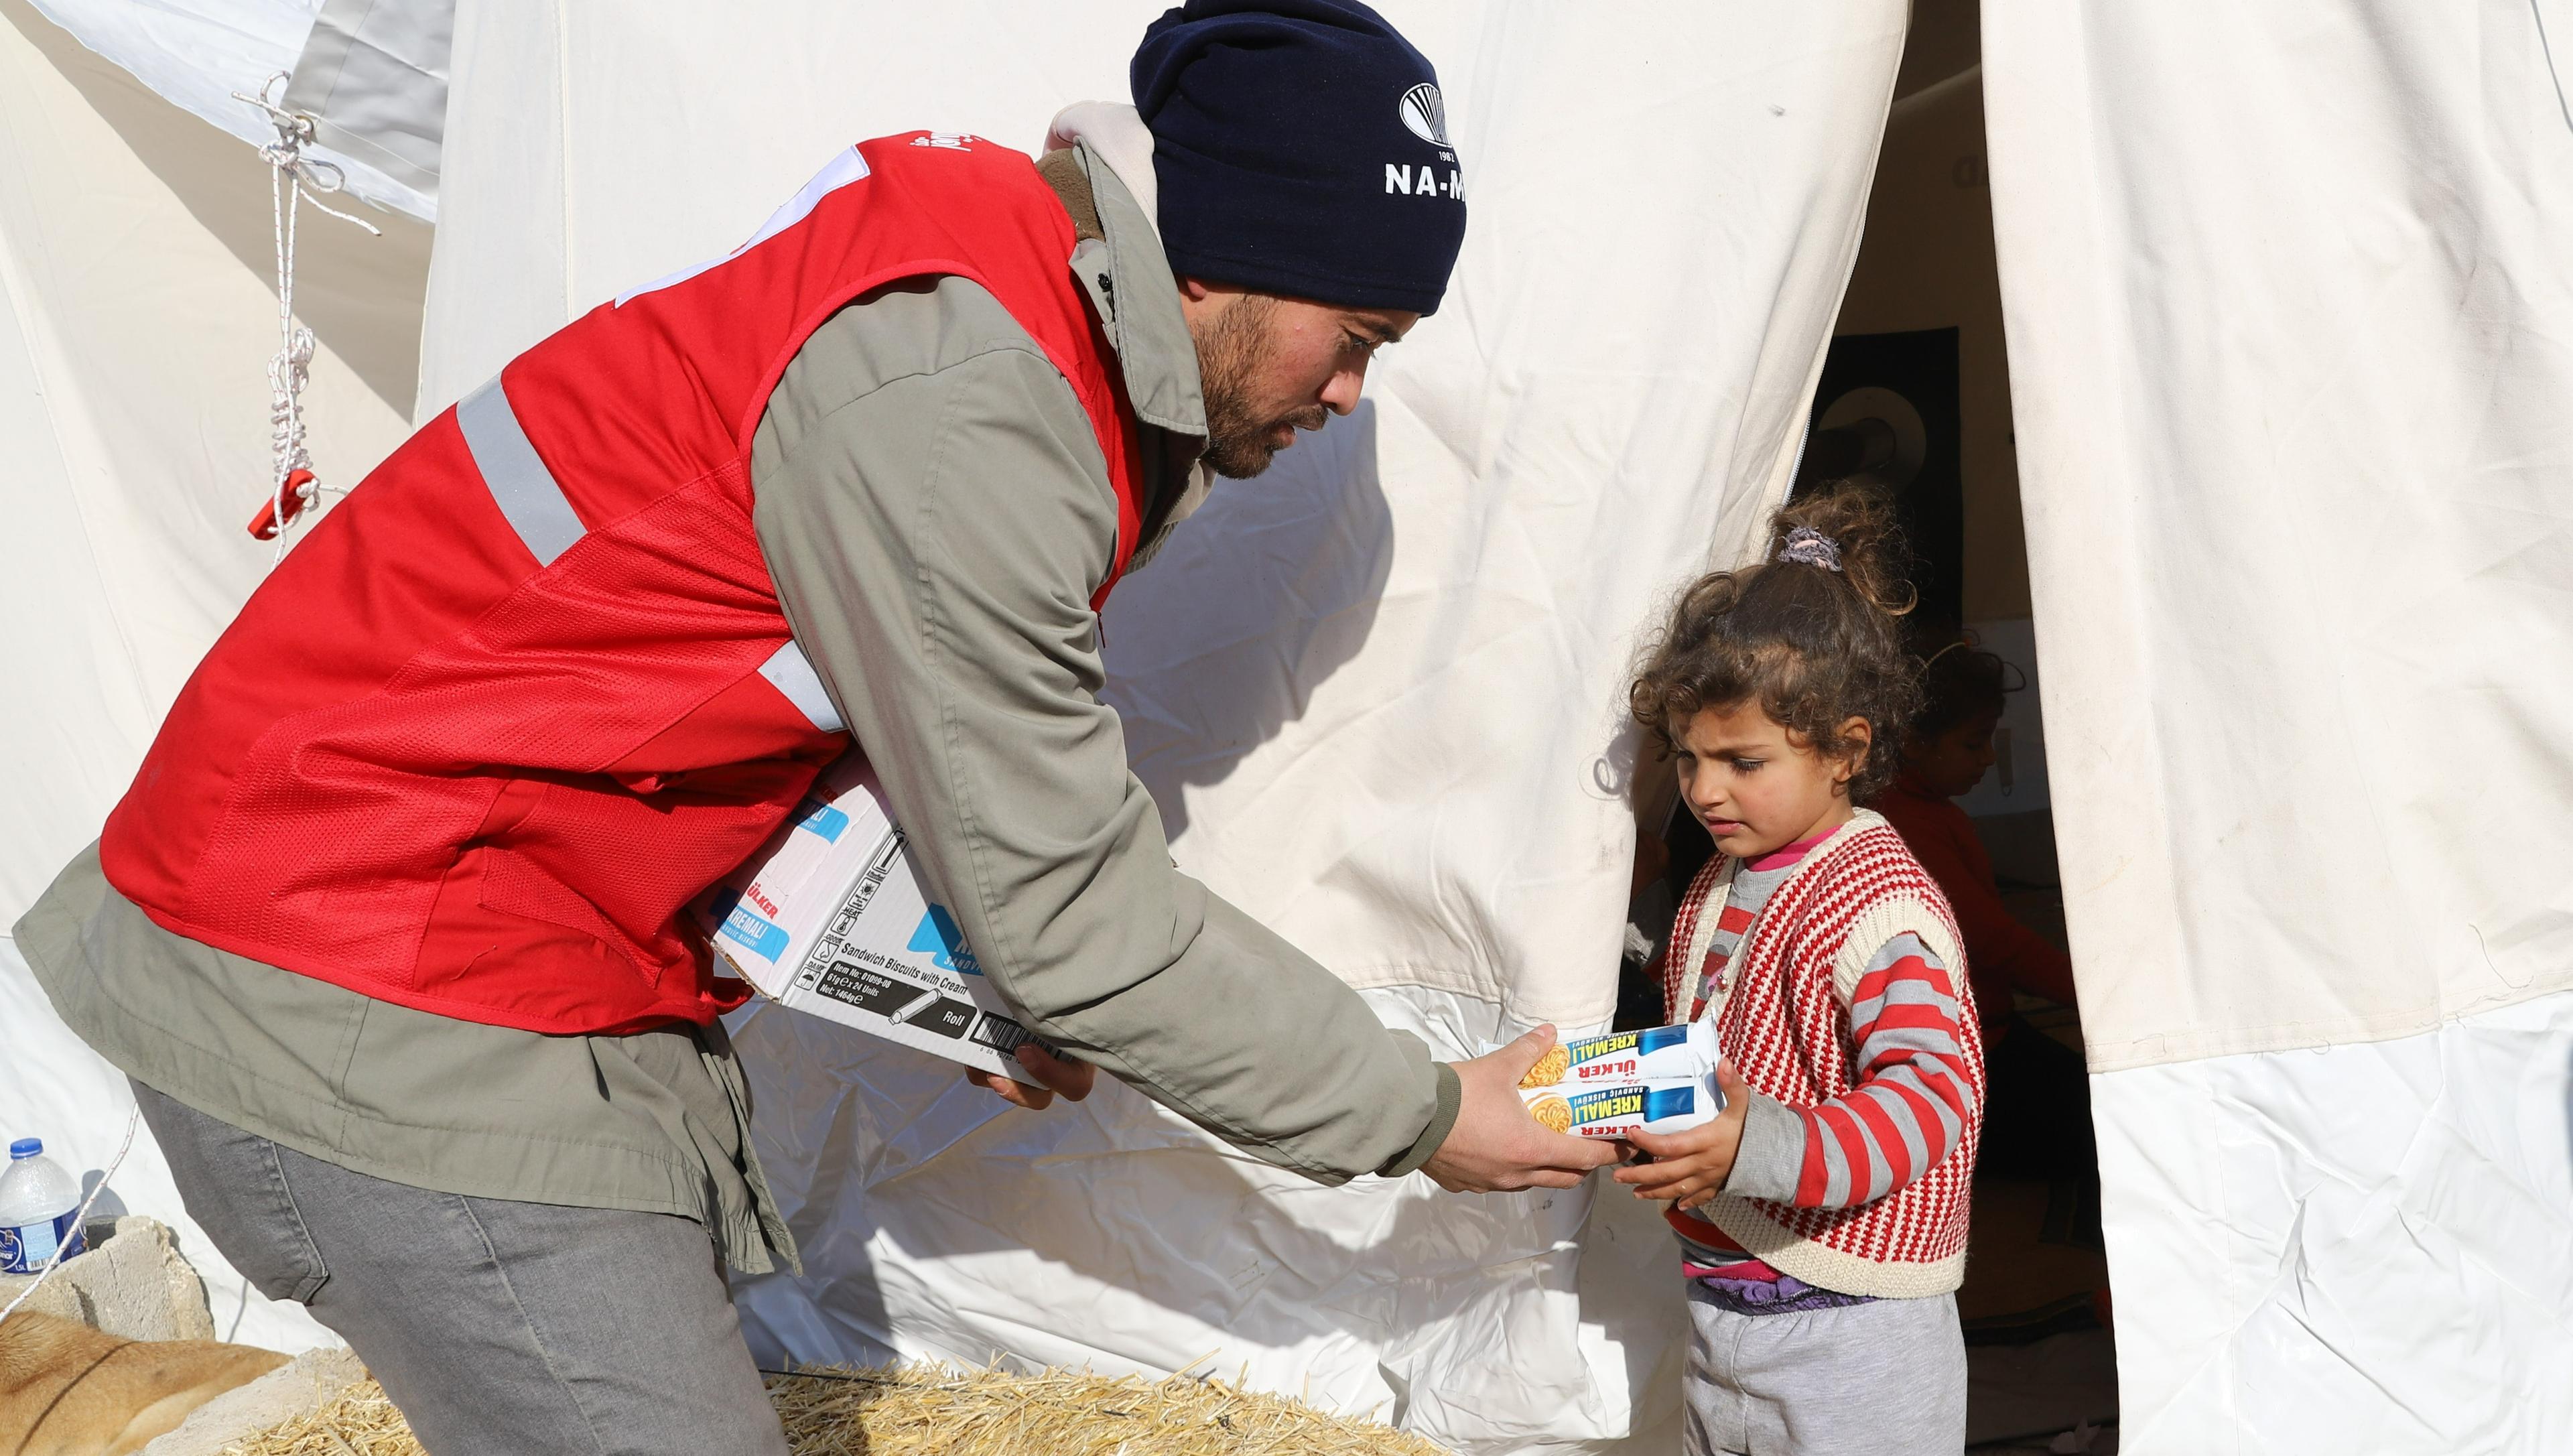 The Red Crescent distributes food to the survivors of the earthquake disaster in the tent camp in Turkey. 